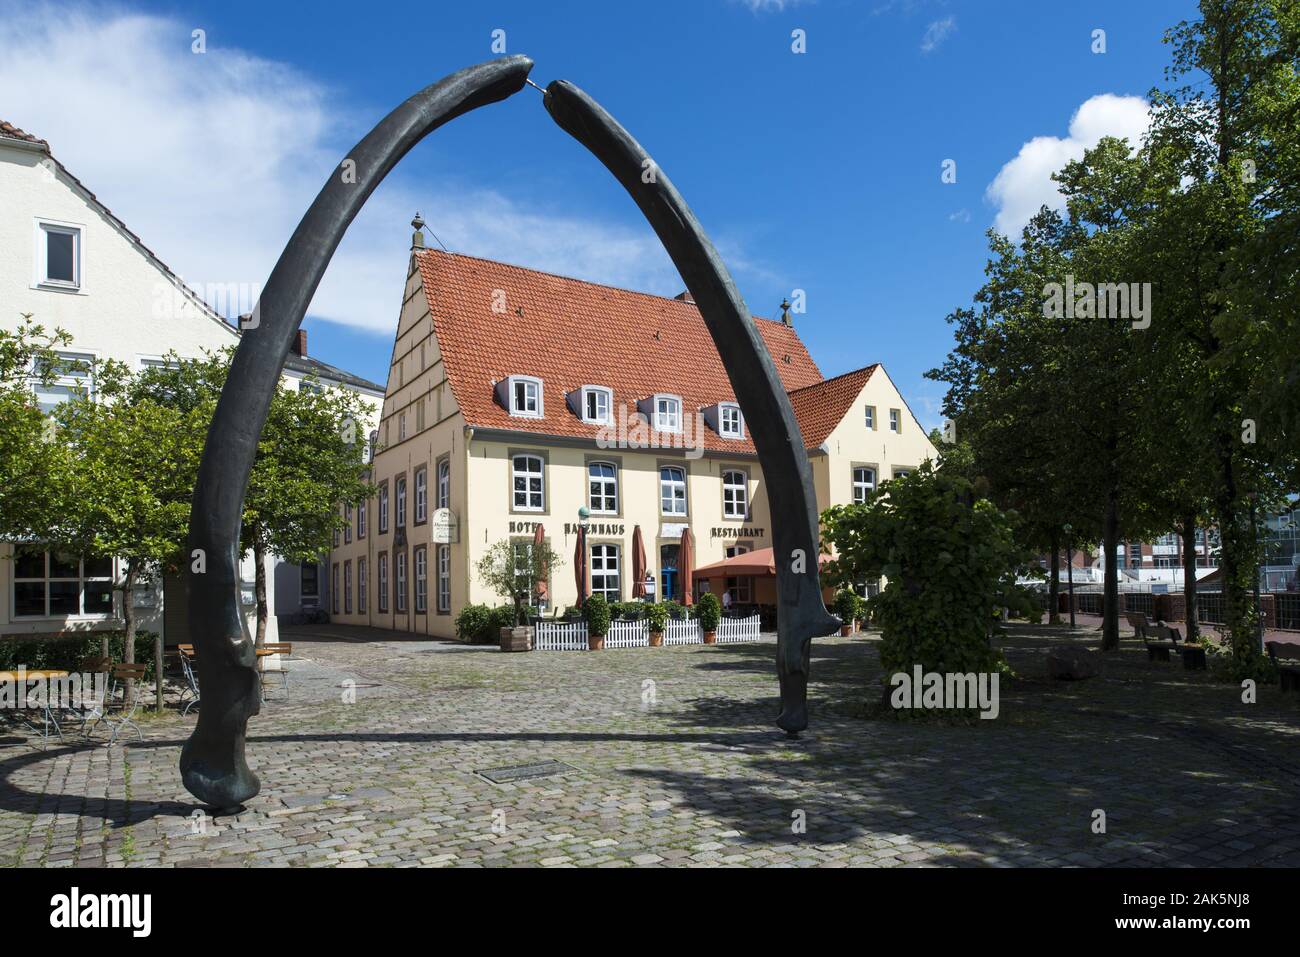 Bremen Vegesack High Resolution Stock Photography and Images - Alamy